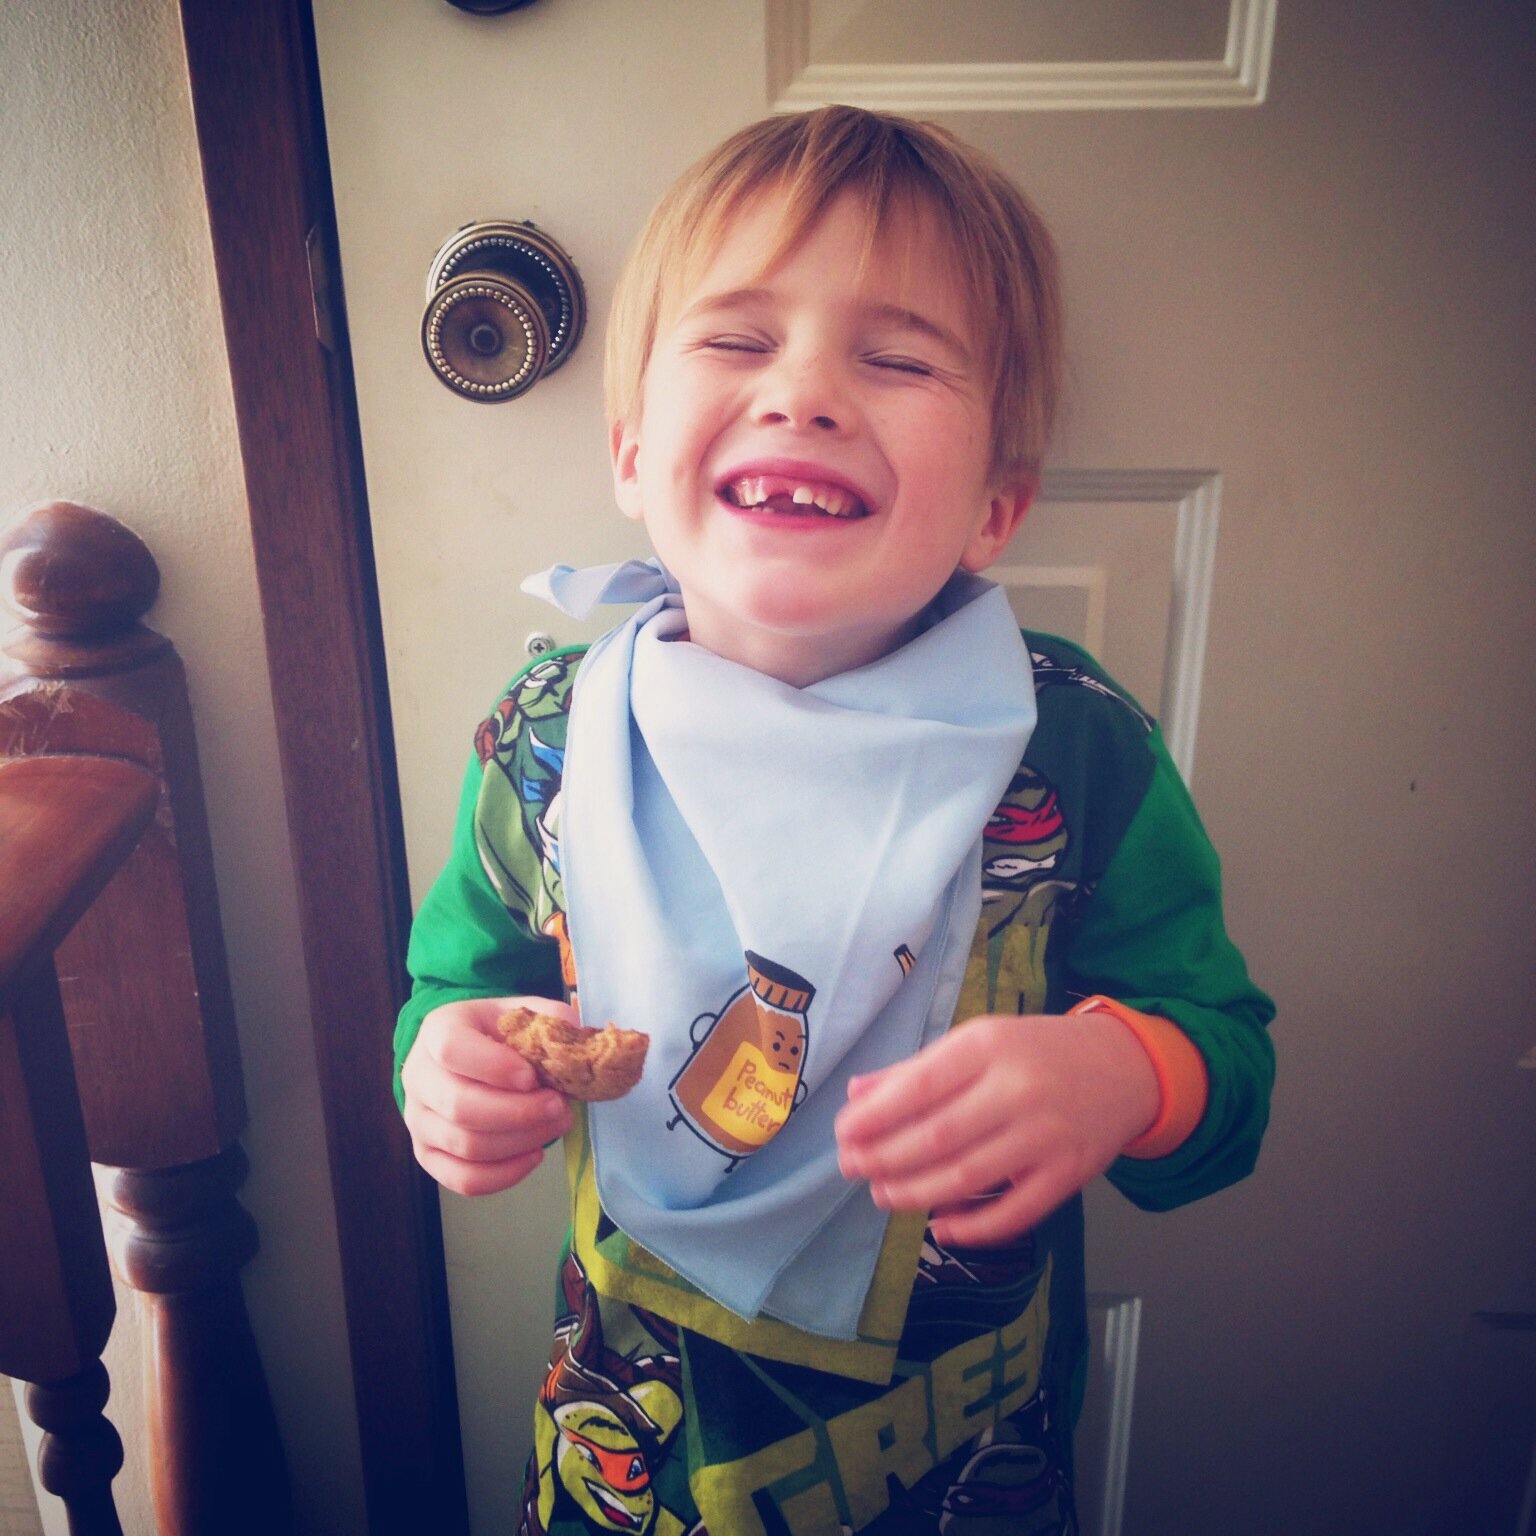   PB vs. Banana napkin/scarf.  Photo of a little boy without a front tooth laughing as he eats a cookie, with a light blue napkin tied around his neck. The napkin illustration is of a jar of peanut butter and banana facing each other, with hands on t